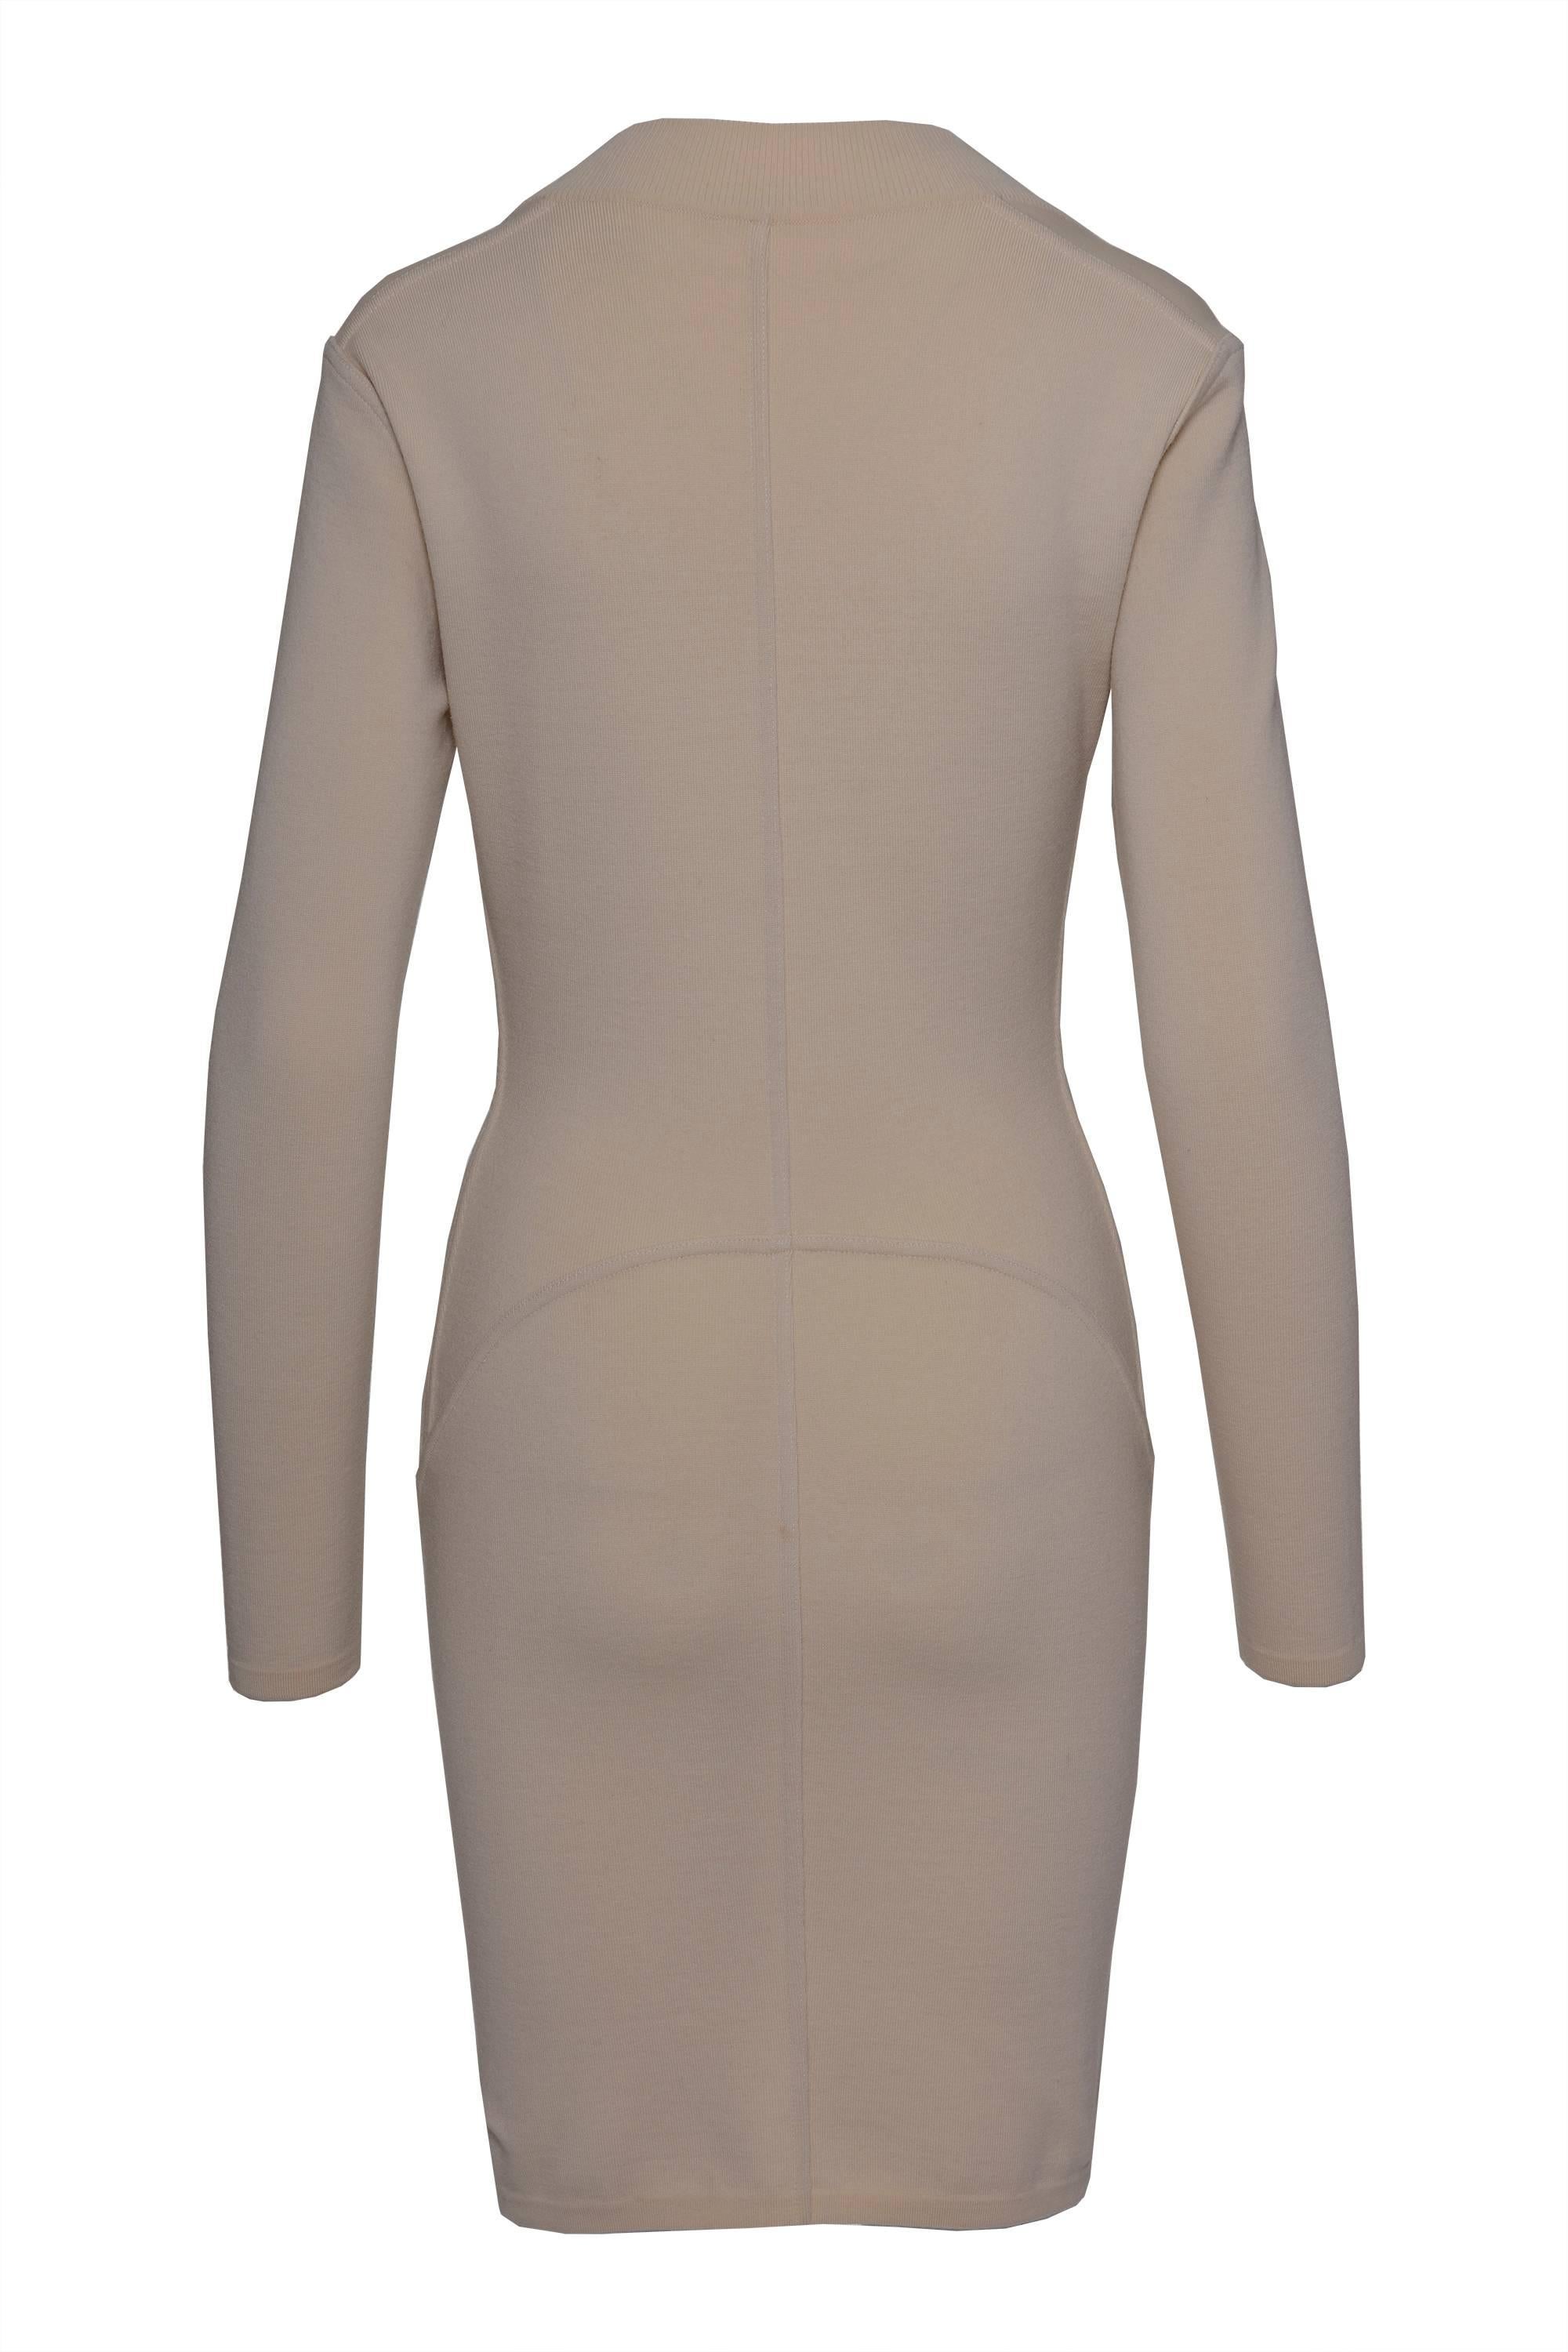 ALAIA Nude sweater dress has a trapezoidal off-the-shoulder neckline, with organic frontal cuts, long sleeves, nude color, and pencil skirt. Made in Italy.

Excellent condition

Label: ALAIA Paris Made in Italy
Label size: M IT
Material: 86% Wool